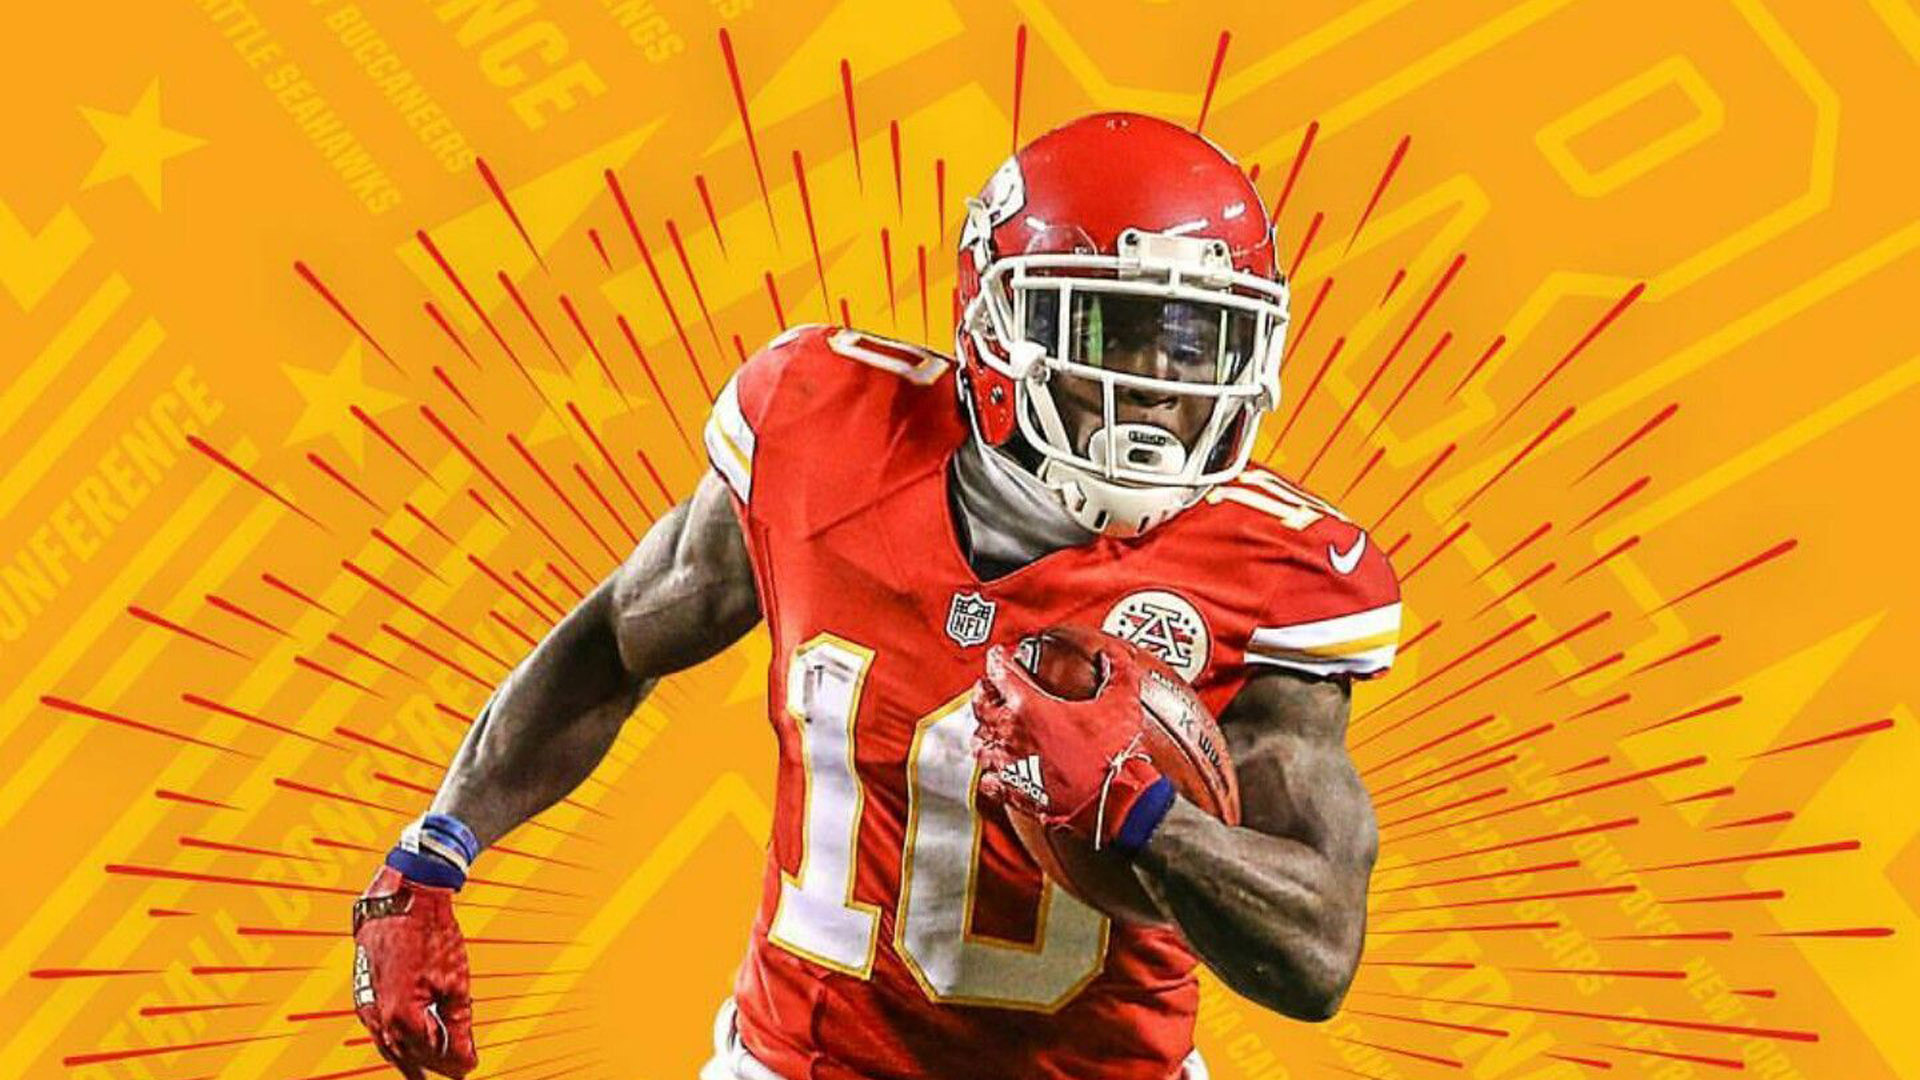 Pro Bowl Tyreek Hill Is Holding Football With One Hand Wearing Red Sports Dress And Helmet HD Tyreek Hill Wallpaper